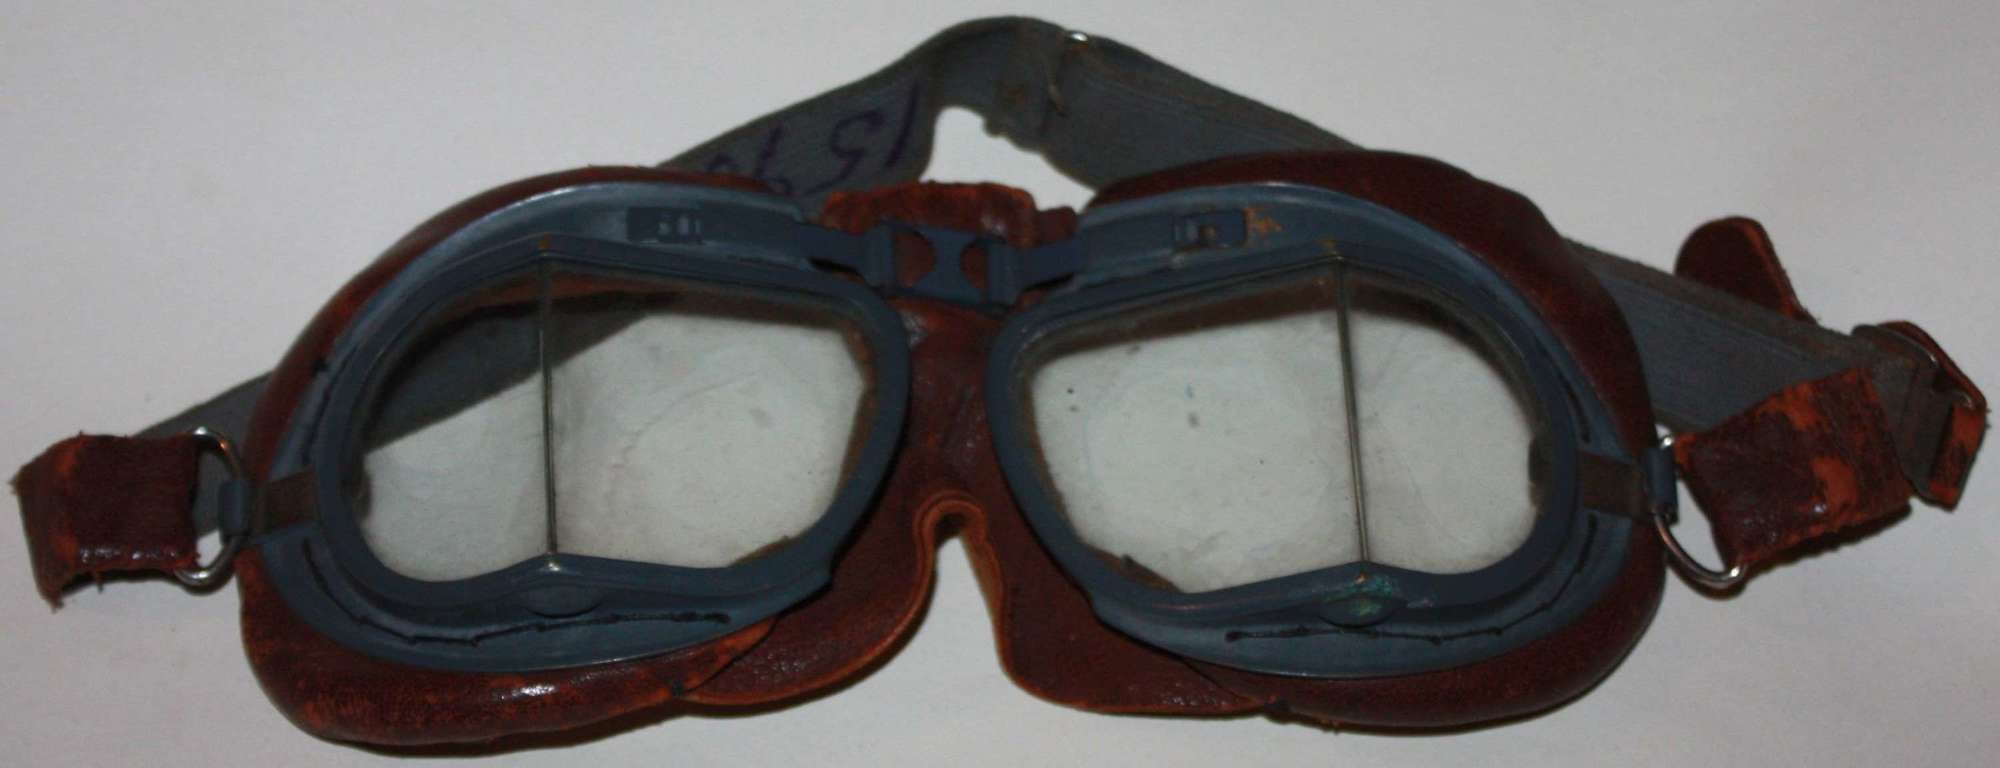 A GOOD USED PAIR OF THE RAF MKVIII GOGGLES